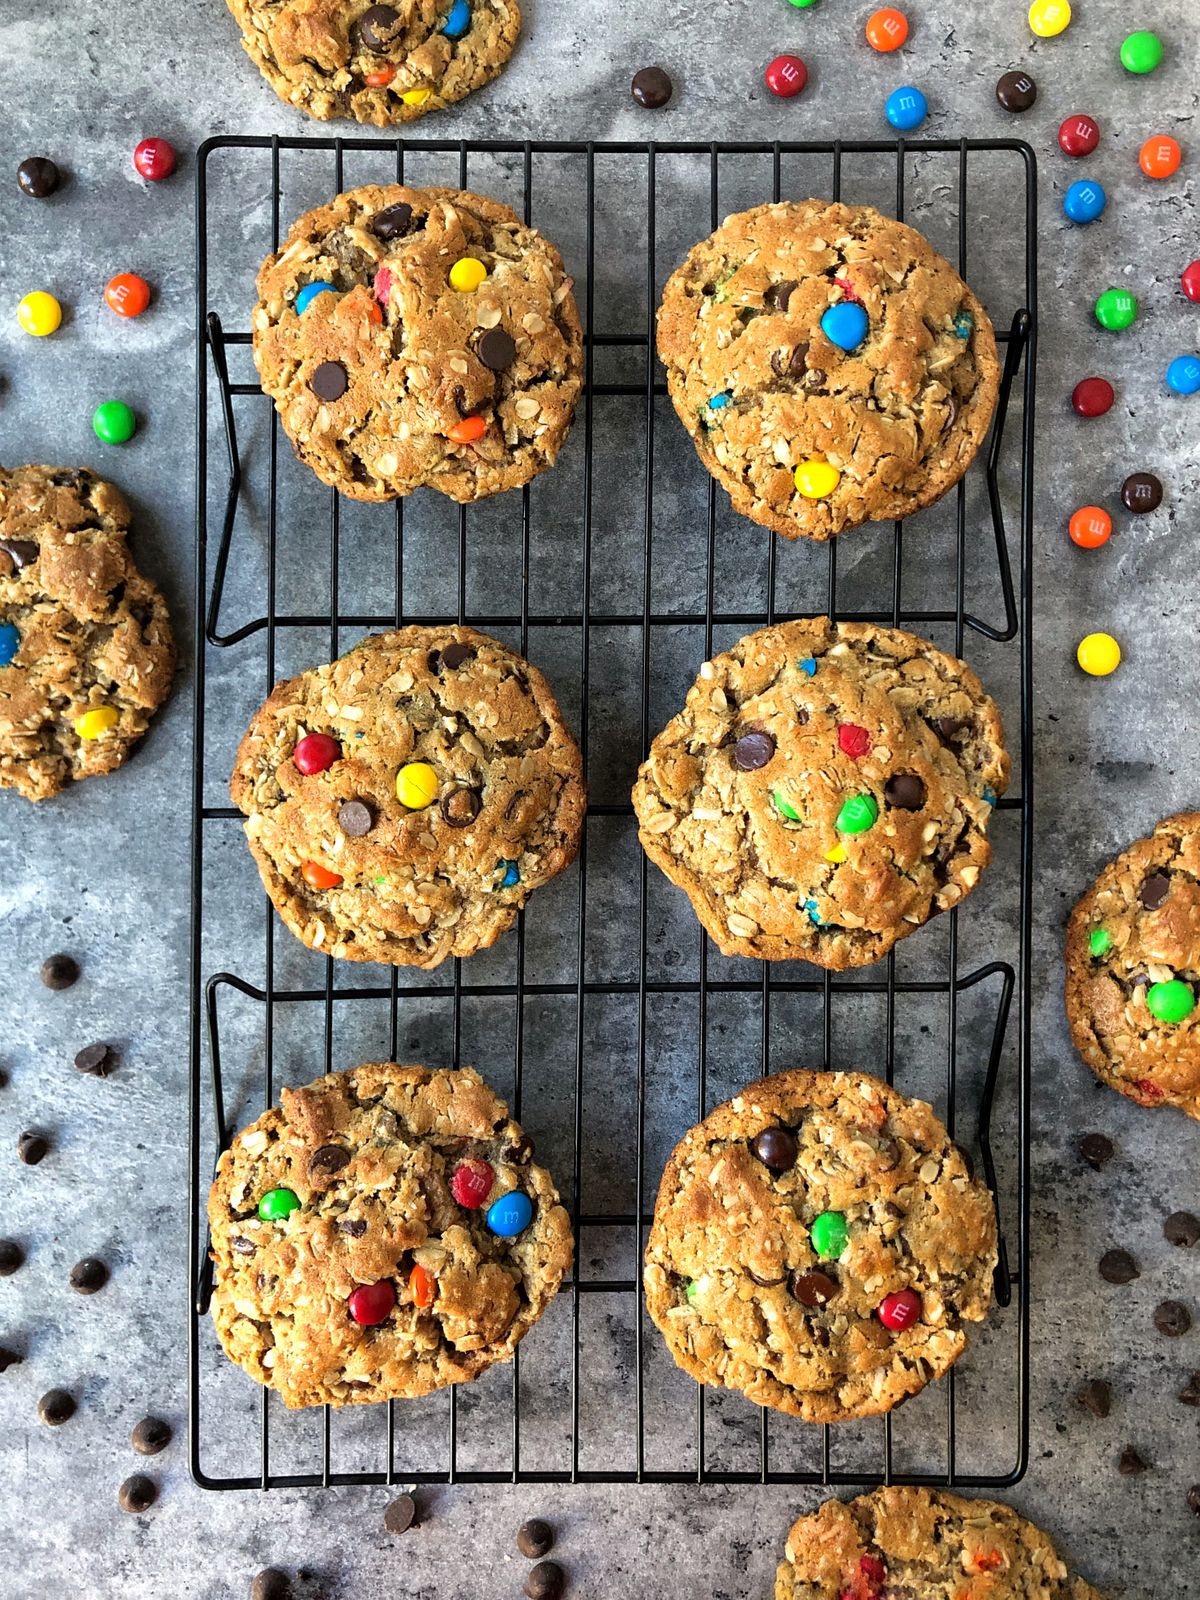 Monster cookies retain heat and continue to cook through after 13 minutes in an oven.  (Audrey Alfaro/For The Spokesman-Review)